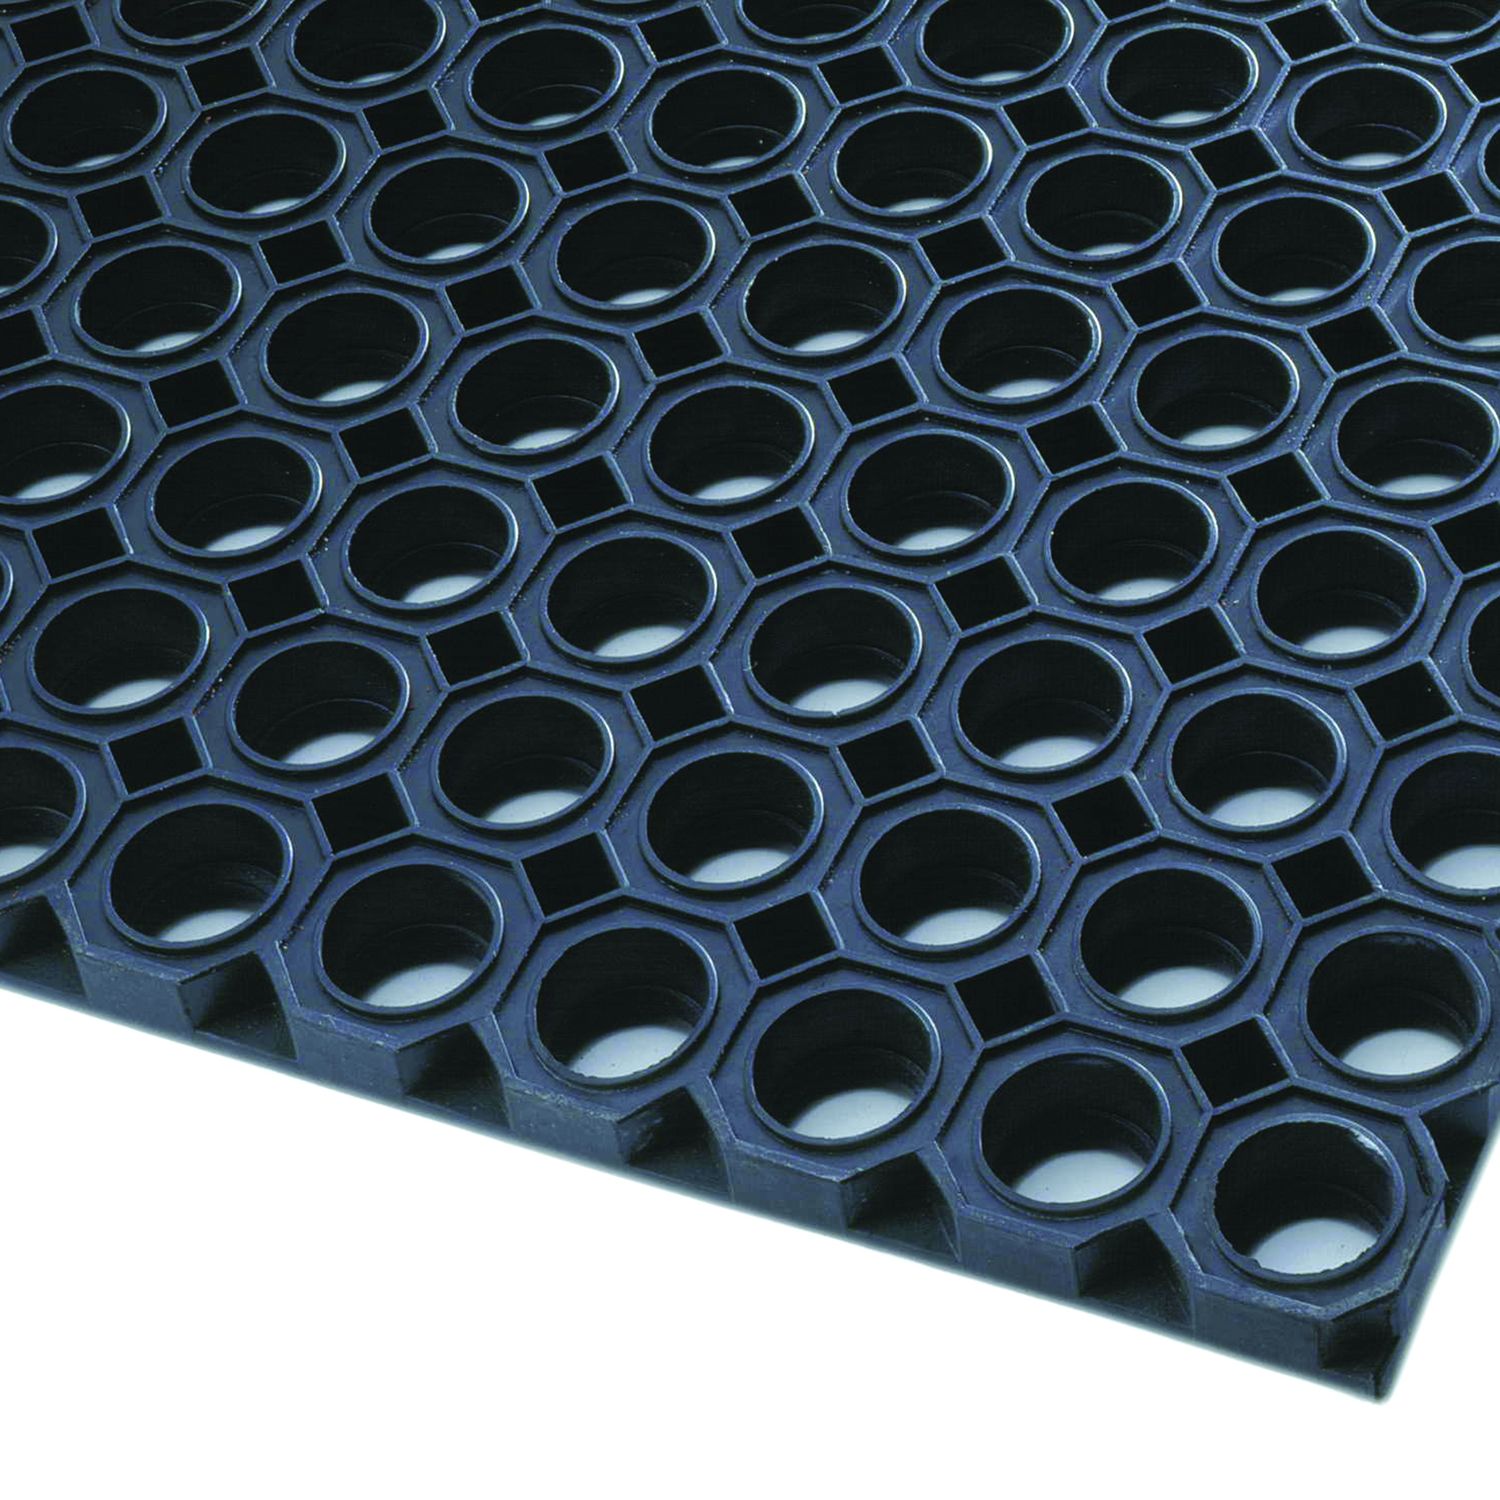 https://jsg.xcdn.nl/images/29707/notrax-564-oct-o-mat-23-mm-outdoor-entrance-mat-black-zoom-image-3235.jpg?sf=1&f=&f=rs:fit:1500:1500/g:ce&s=1